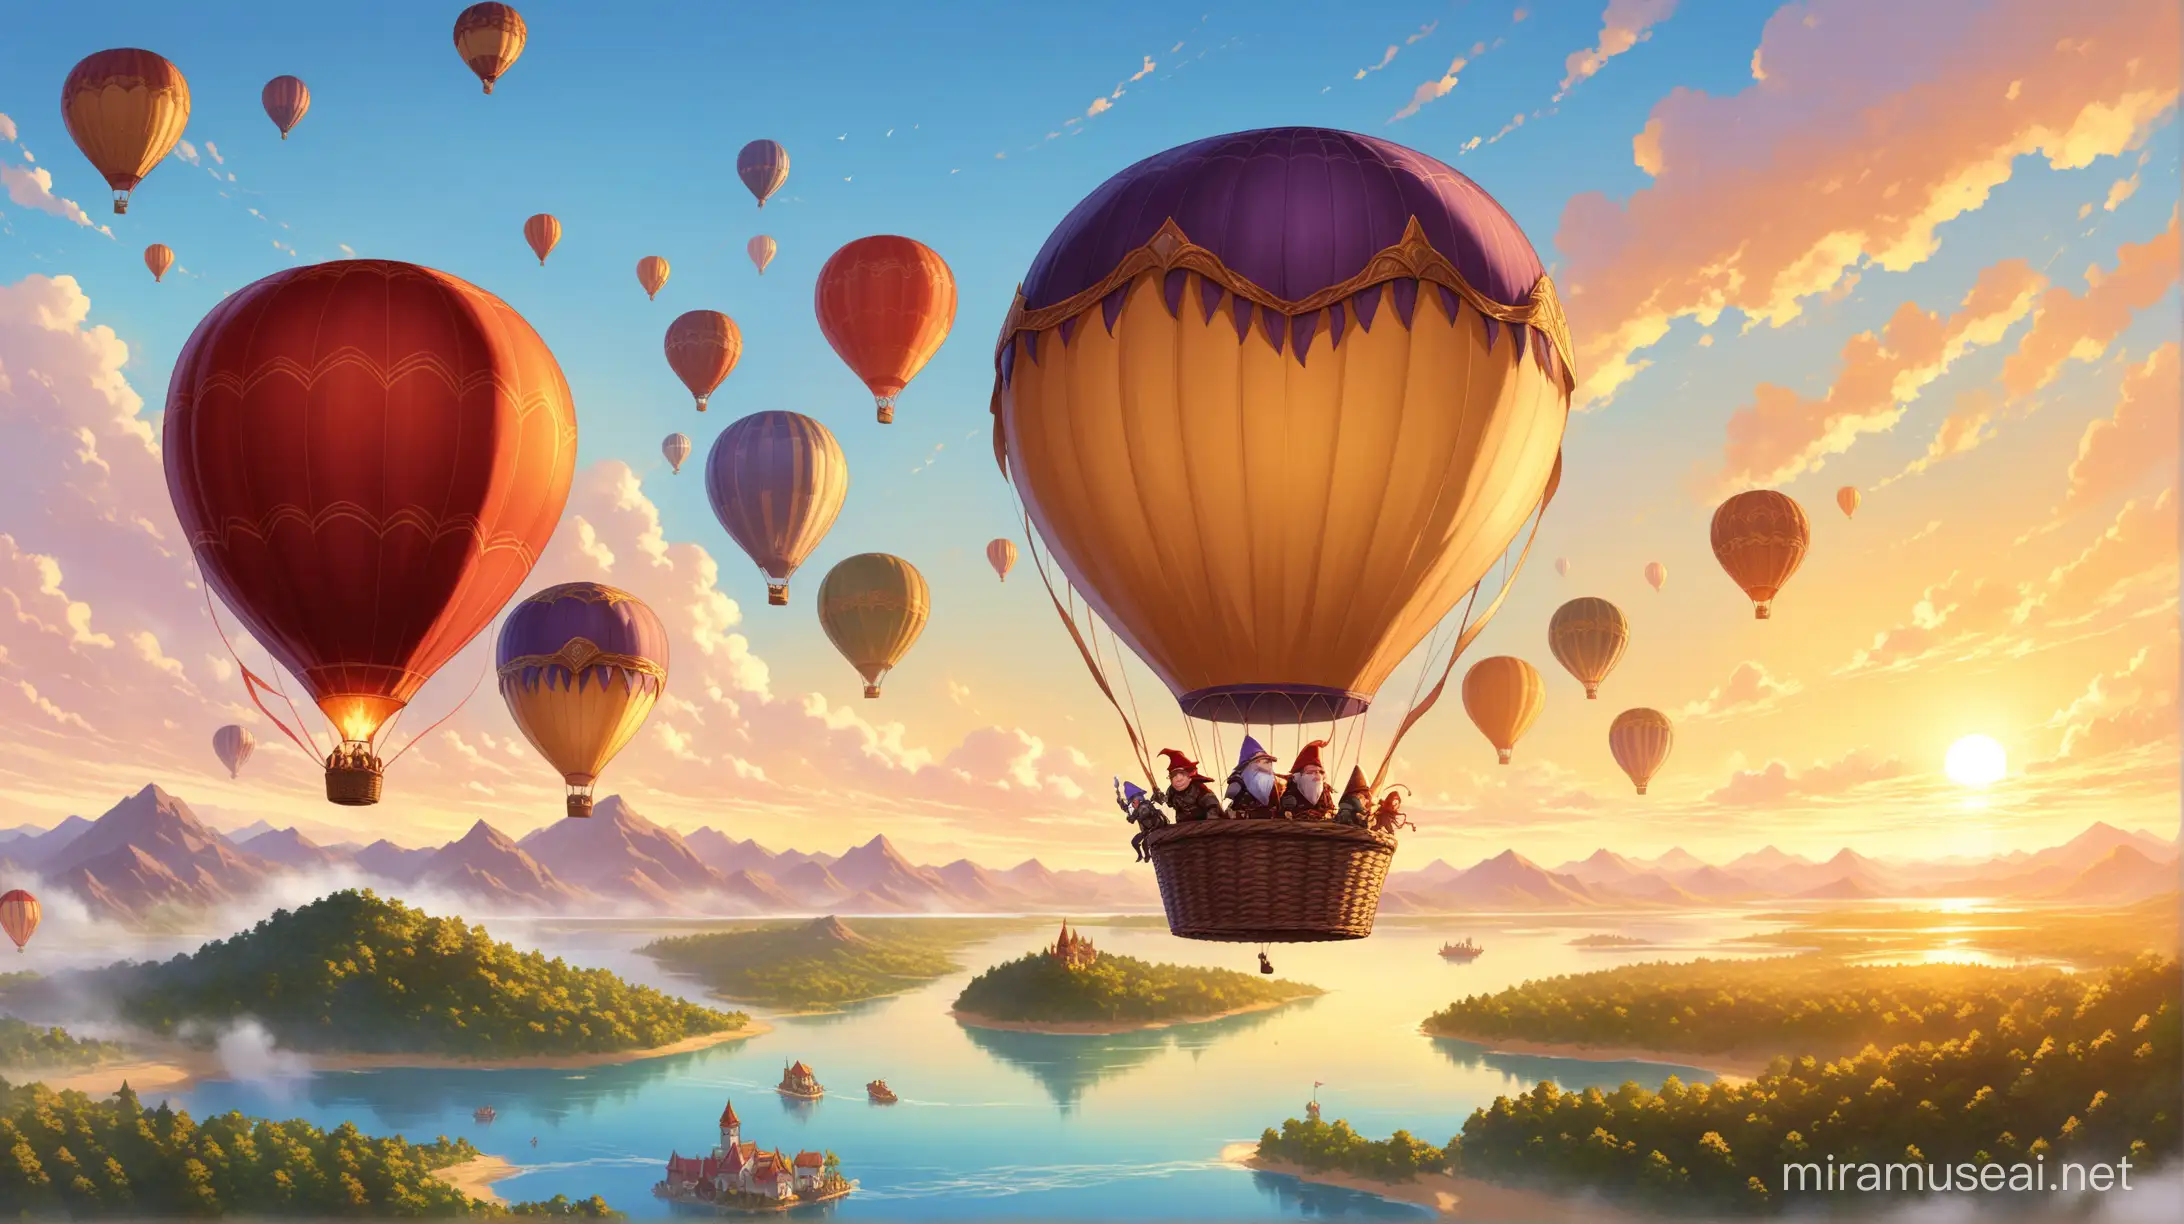 a panoramic view of a single hot air balloon taking off from the ground of a wooded island. The balloon part of the hot air balloon is made of snake skin. The basket of the hot air balloon is carrying five passengers. There is only one hot air balloon in the image. The passengers in that single hot air balloon have genders fantasy humanoid races and apparent jobs as described next, the first passenger is a female white dragonborn paladin, the second passenger is a male purple-haired gnome, the third passenger is a human male barber, the fourth passenger is a female red tiefling sorcerer, the final passenger is a human-sized ant person breathing fire into the base of the hot air balloon. 